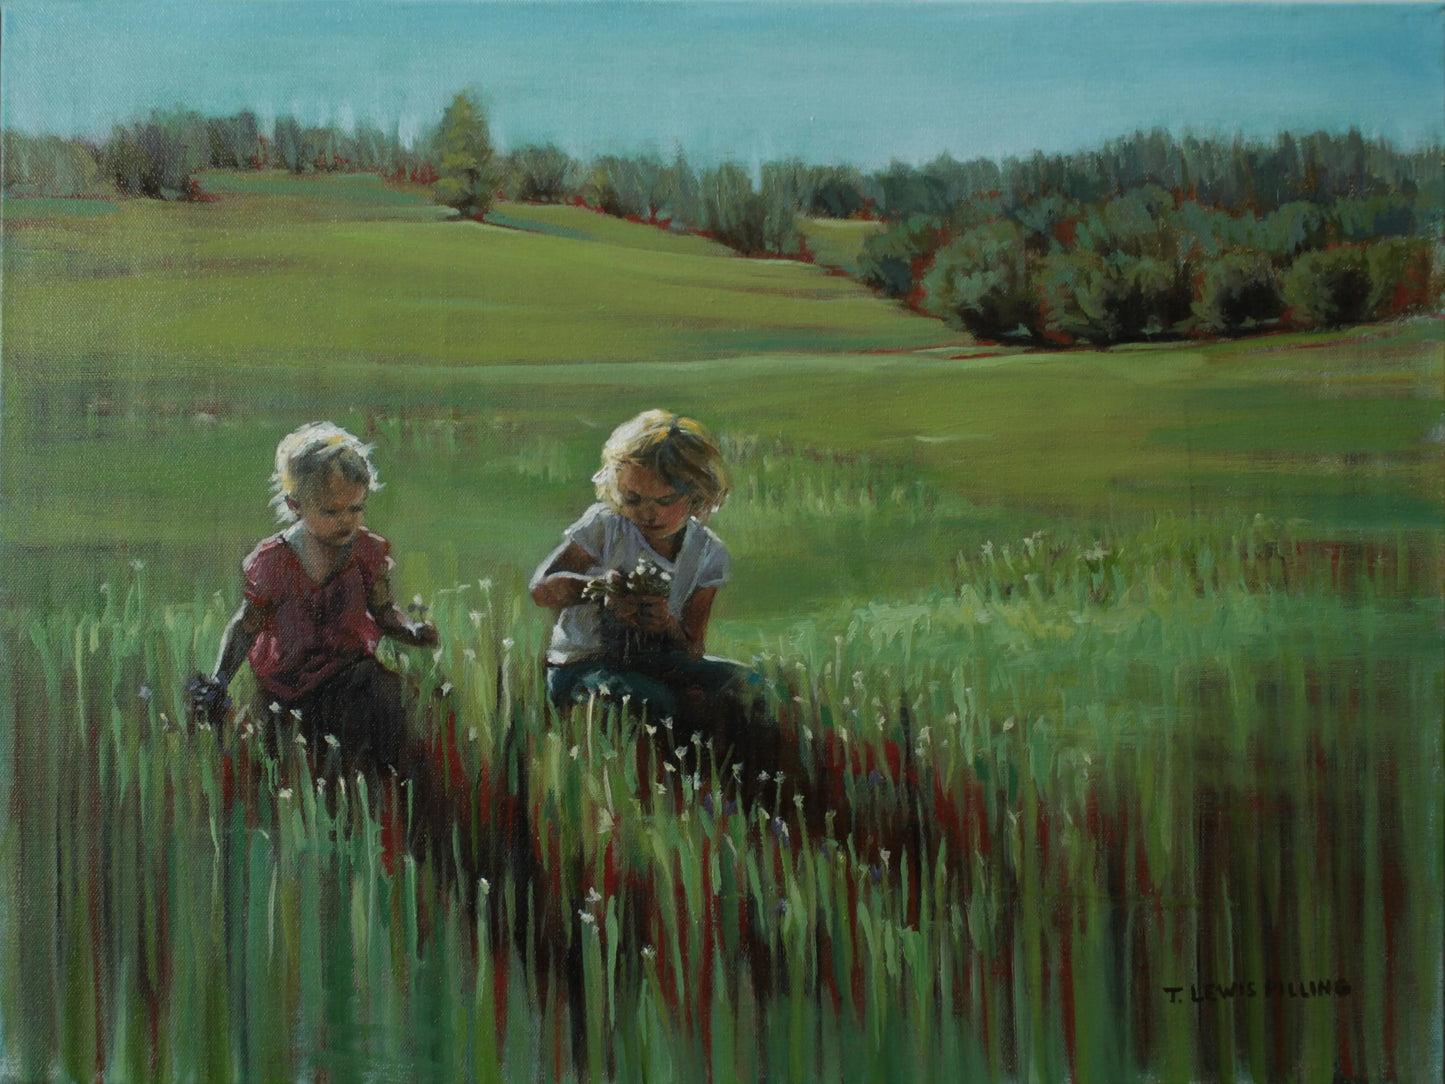 Landscape oil painting of two girls in a field picking flowers in the evening sun. Painting by artist Tanya Pilling.